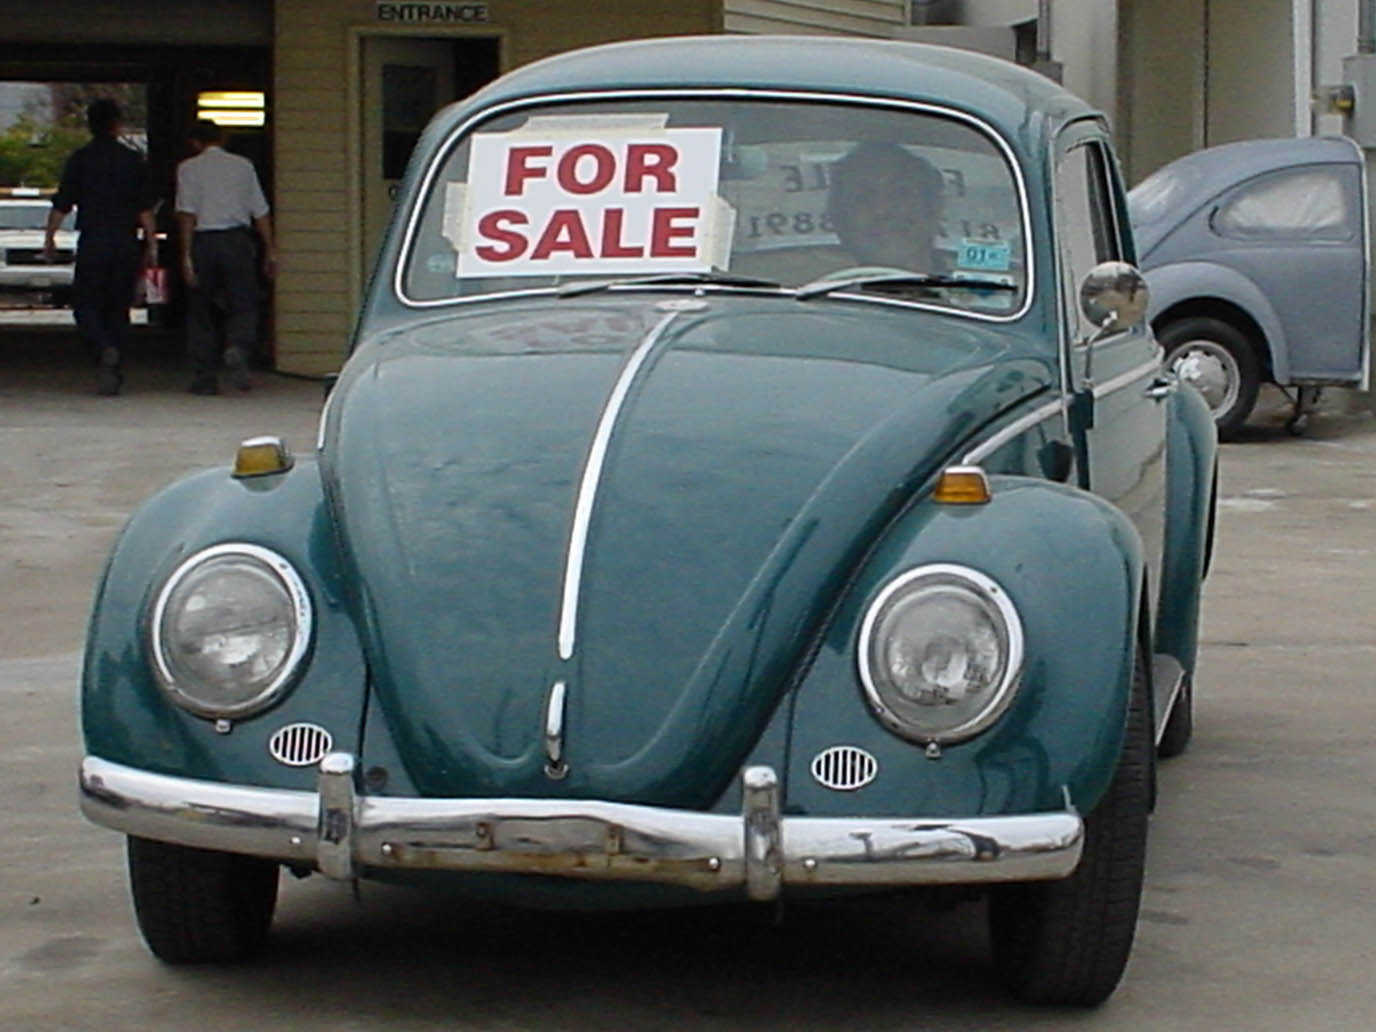 Buying A Used Car? These Useful Tips Could Save You Some Stress!